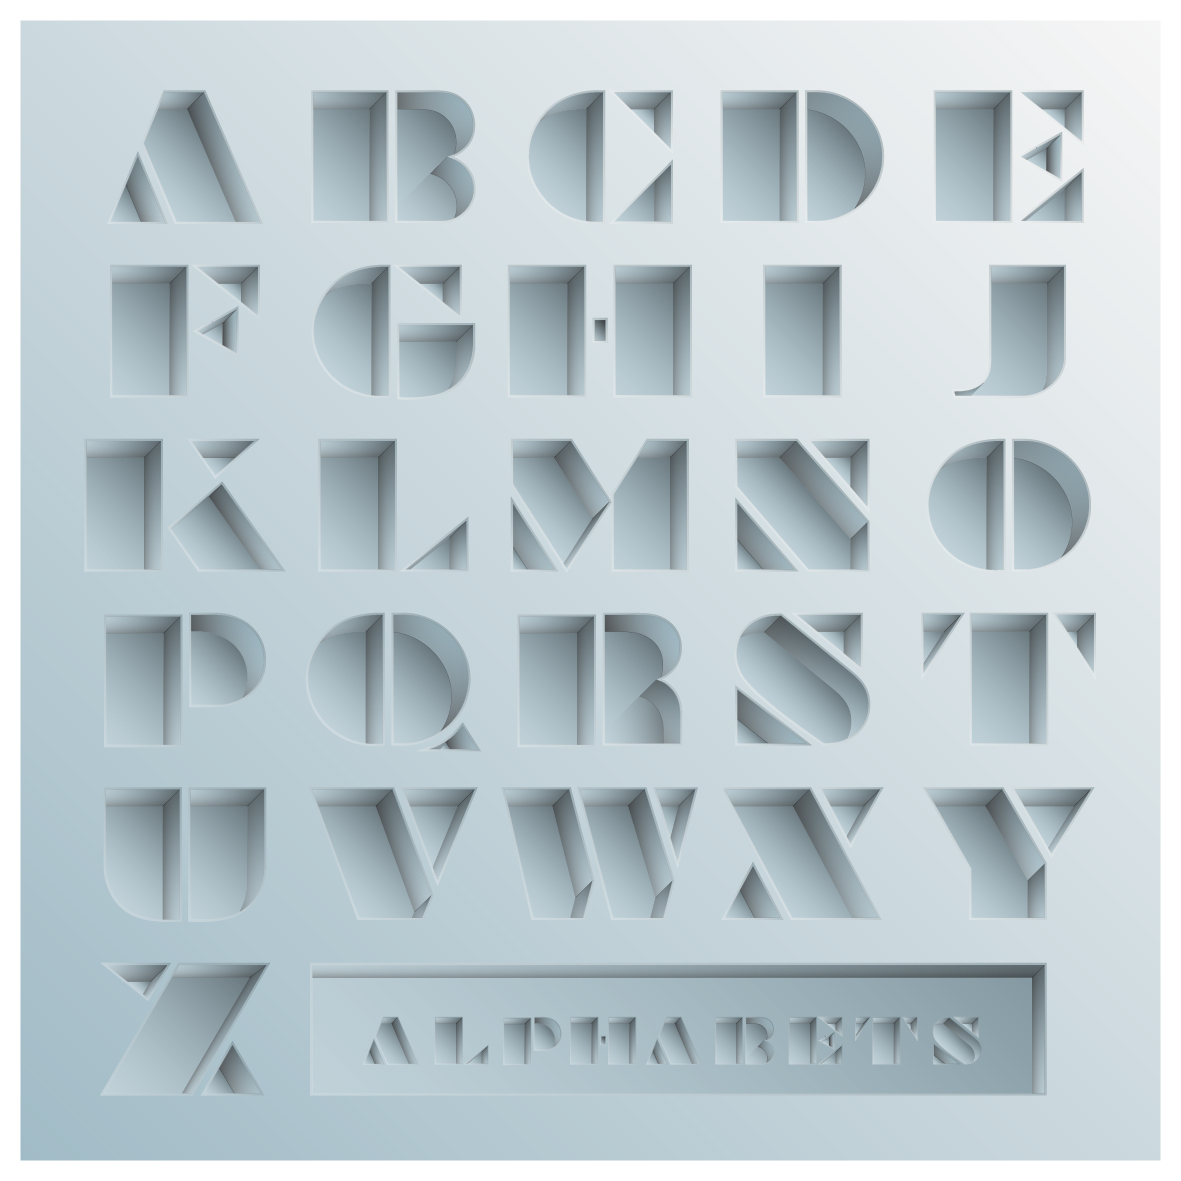 Hollowed-out Alphabets Vector